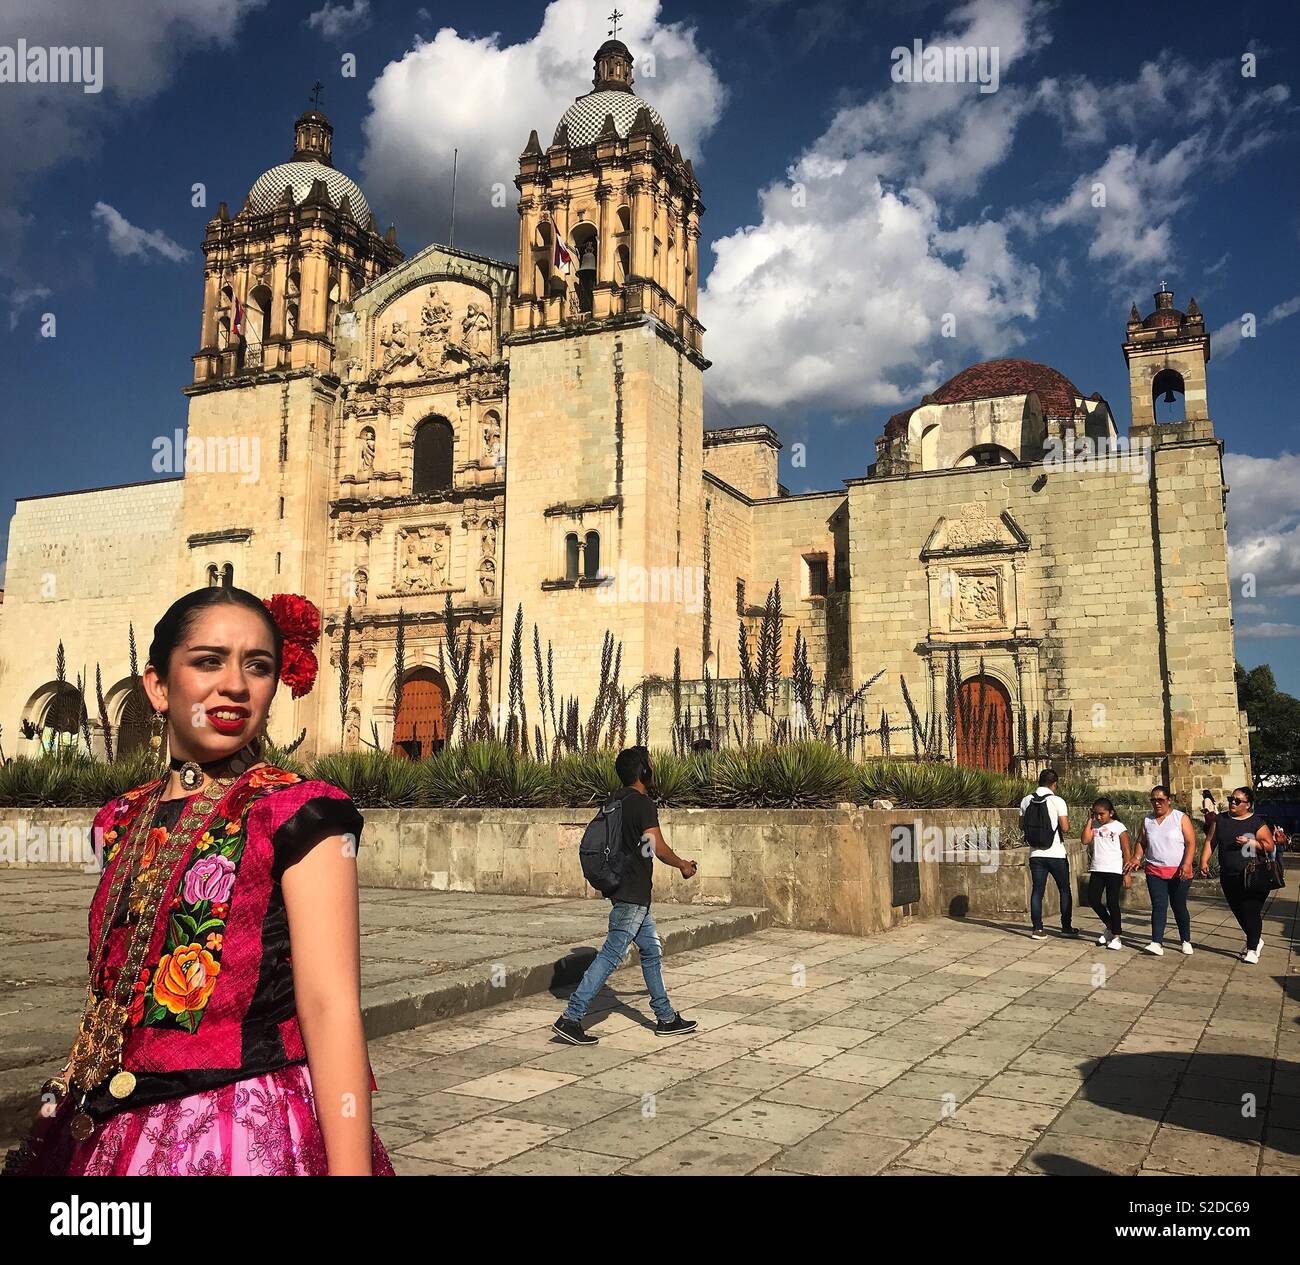 A woman dressed as a ‘tehuana’ stands in front of the Church of Santo Domingo in Oaxaca, Mexico Stock Photo